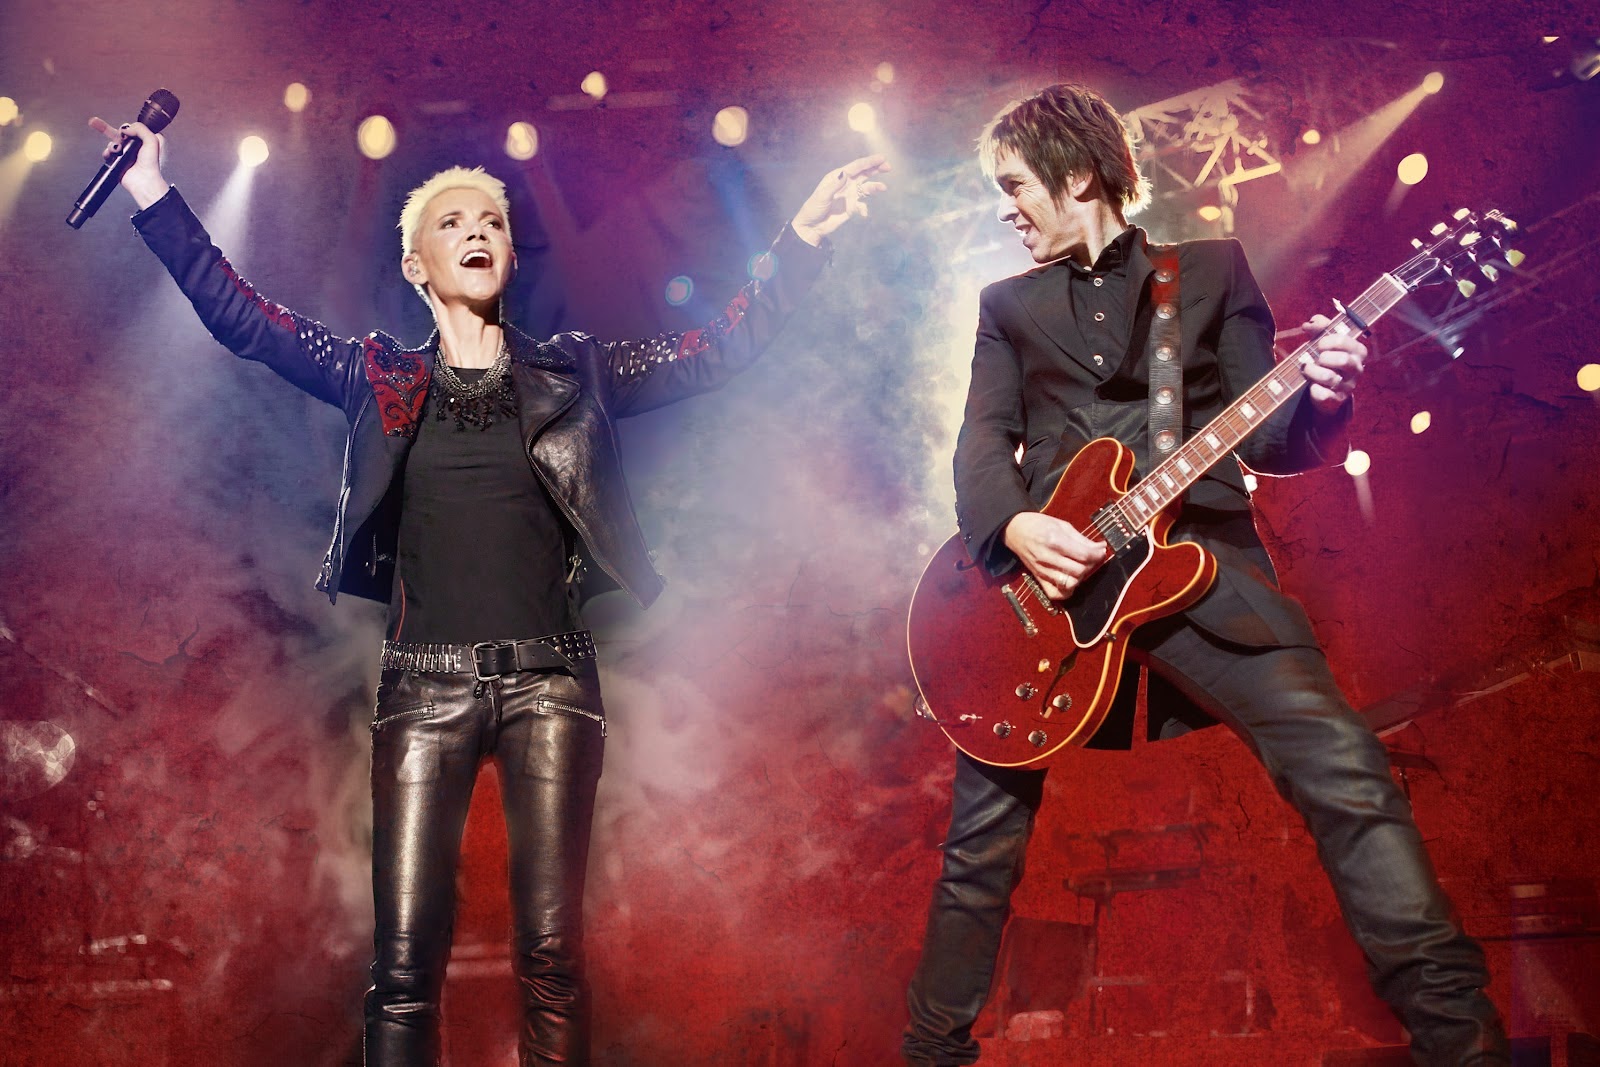 Roxette is a Swedish pop rock duo, consisting of Marie Fredriksson (vocals) and Per Gessle (vocals and guitar).http://www.jinglejanglejungle.net/2015/02/eu3.html #Roxette